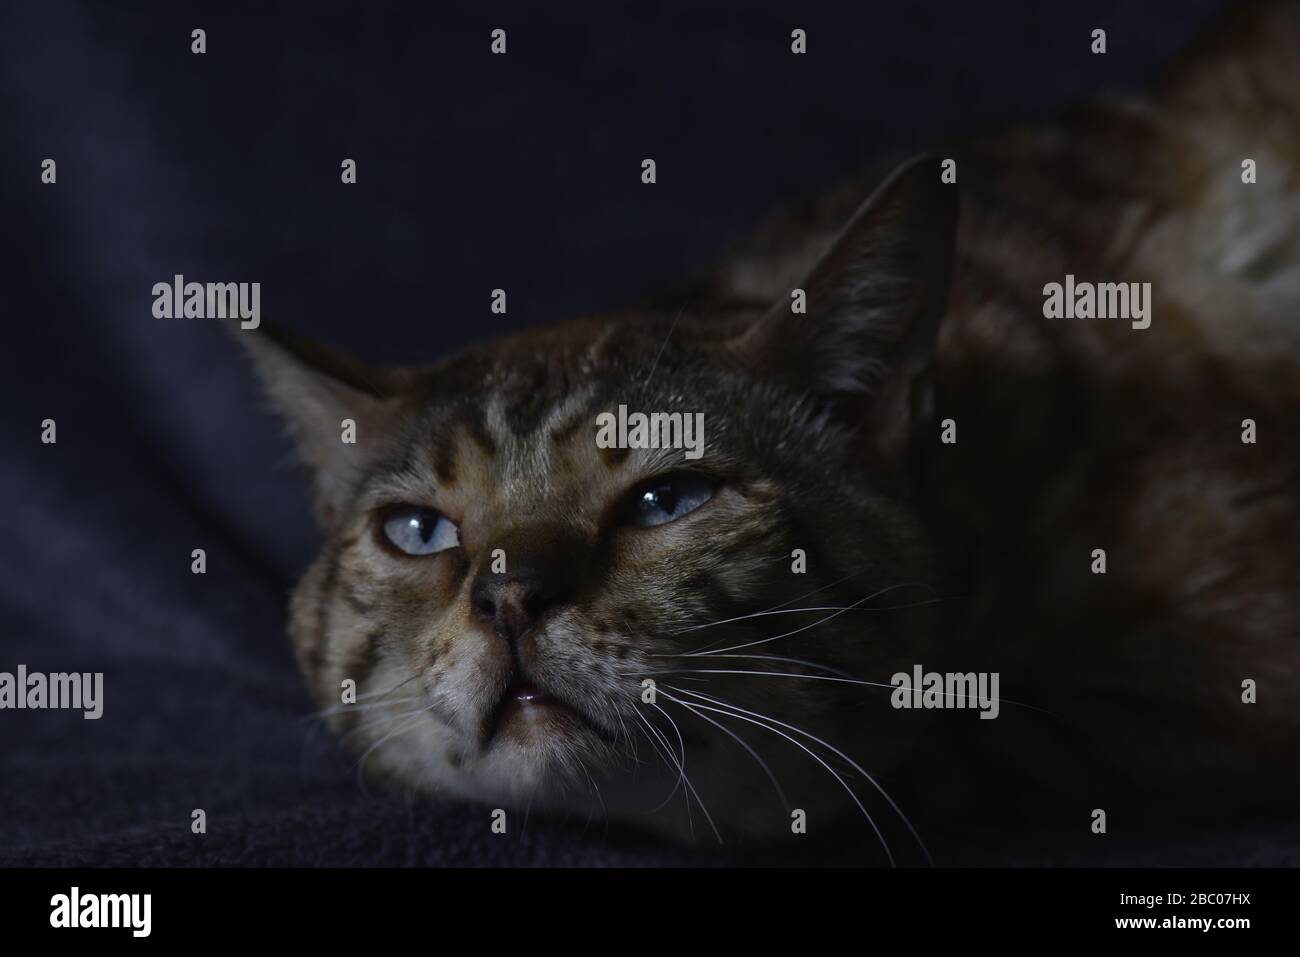 Close up of a tabby cat resting on the blue background in dark colors. Horizontal, front view, portrait. Stock Photo